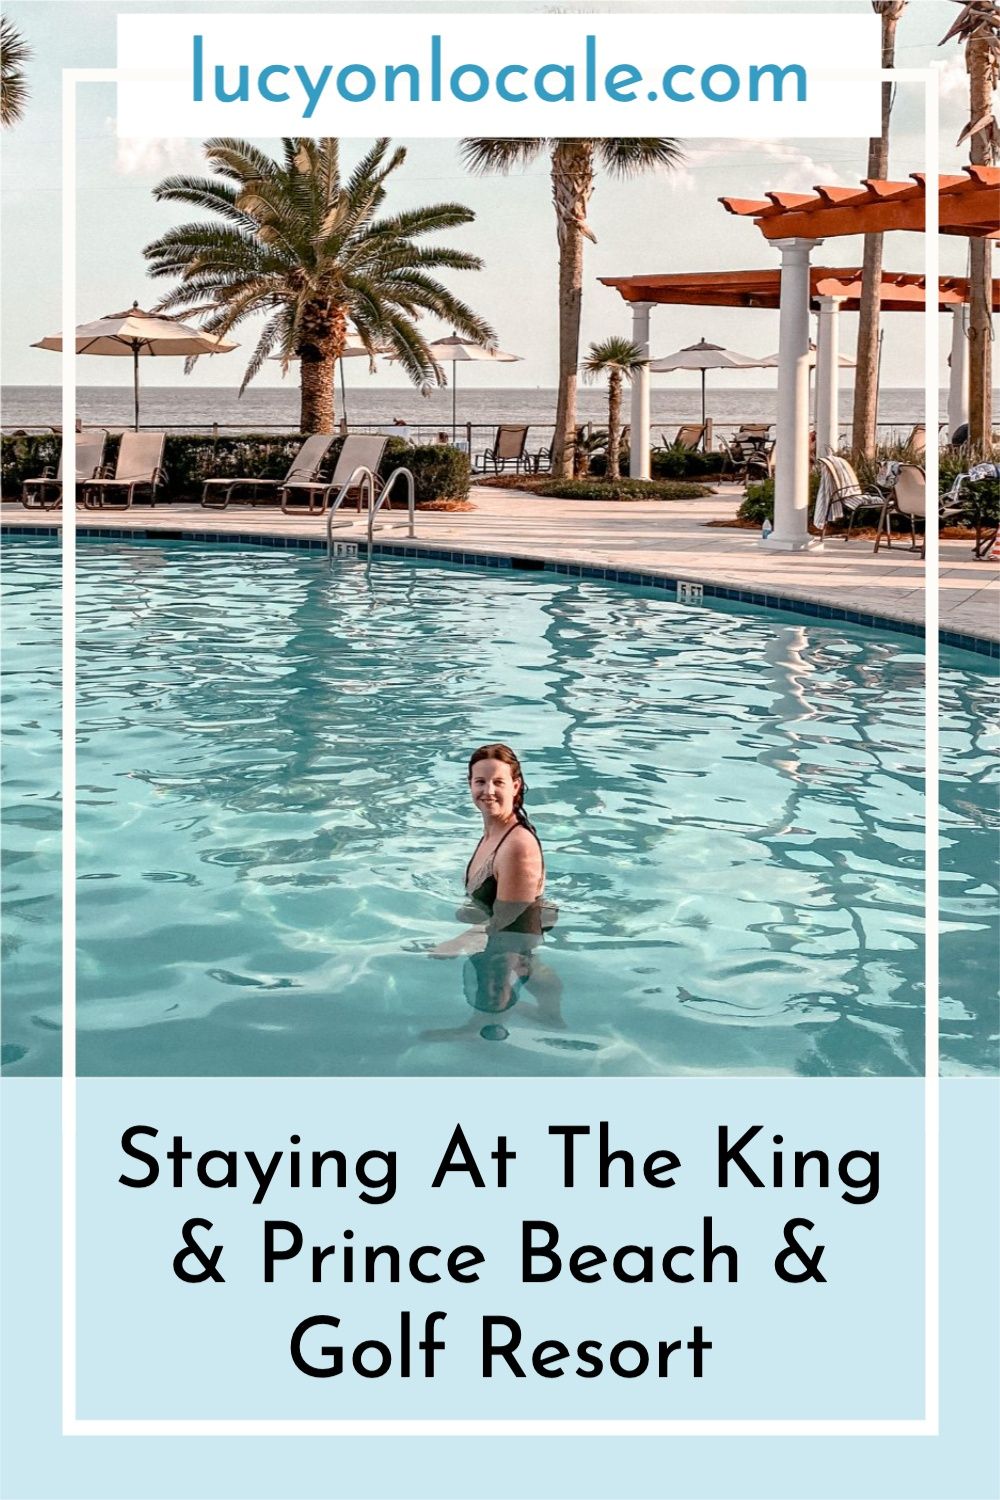 the King and Prince Beach & Golf Resort